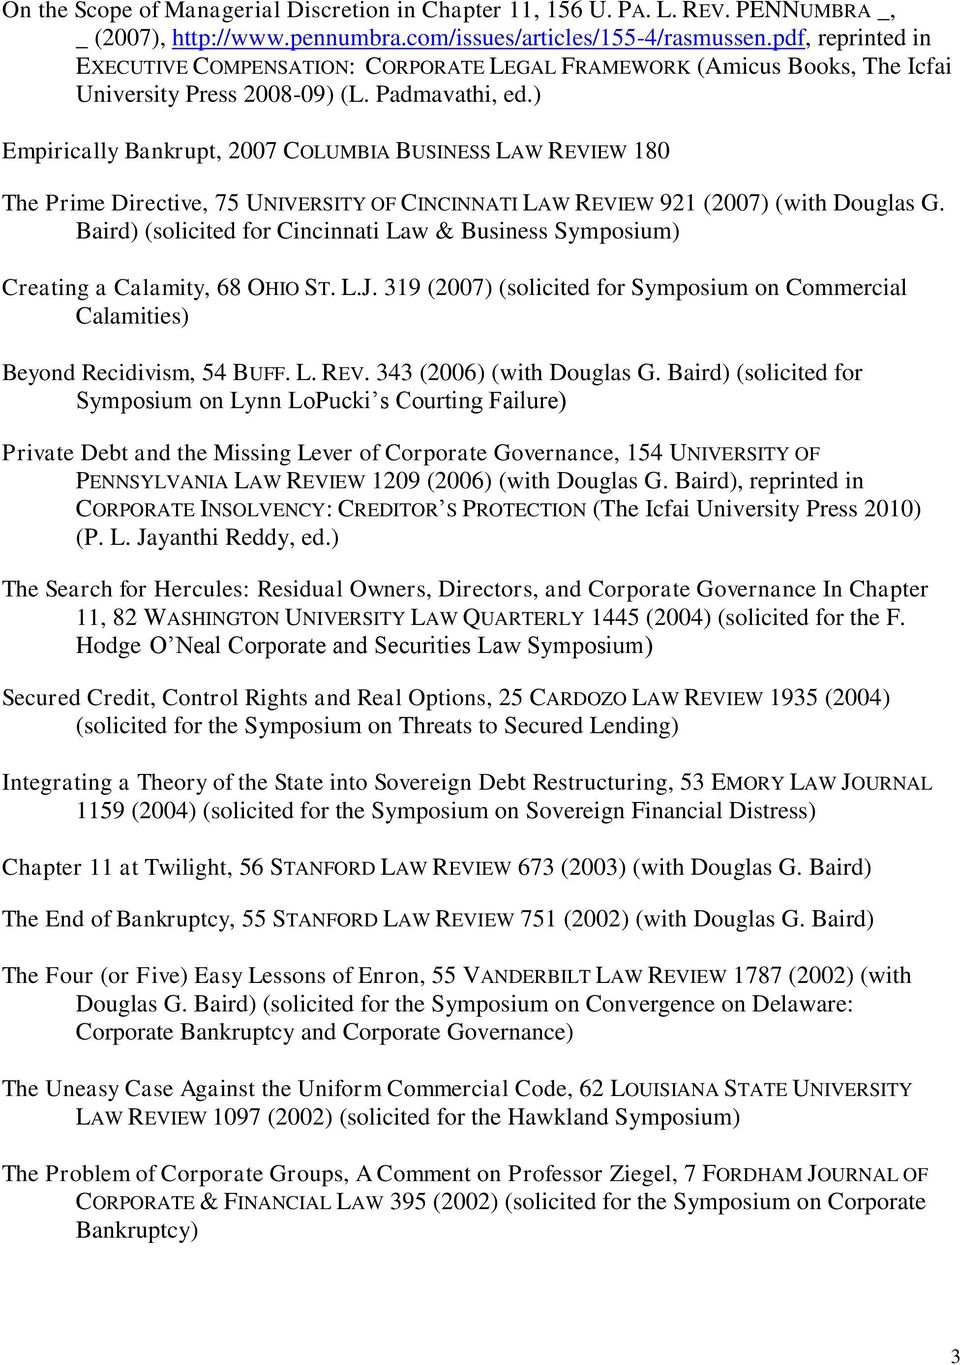 ) Empirically Bankrupt, 2007 COLUMBIA BUSINESS LAW REVIEW 180 The Prime Directive, 75 UNIVERSITY OF CINCINNATI LAW REVIEW 921 (2007) (with Douglas G.